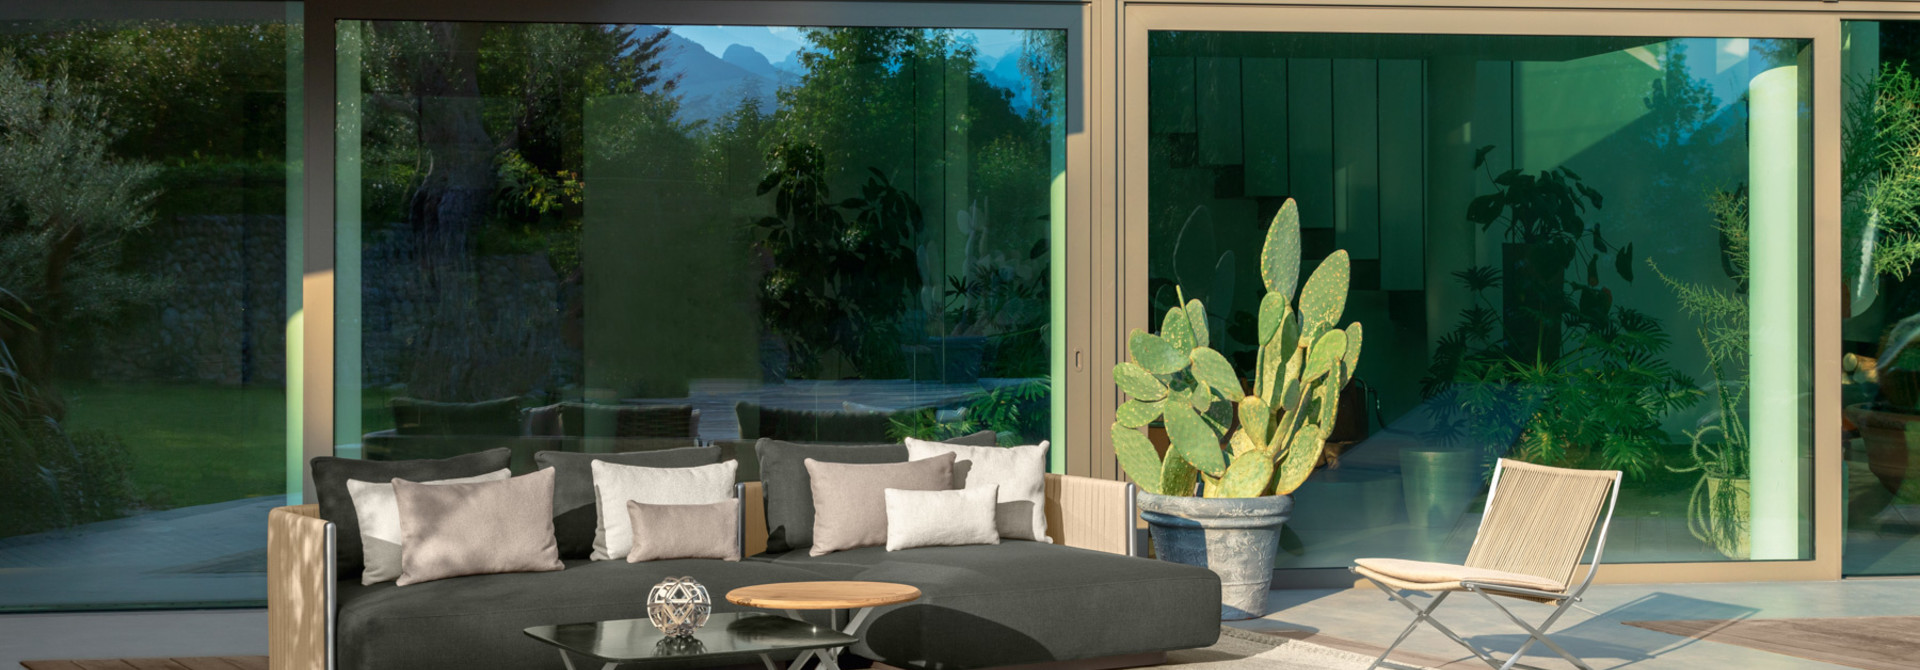 Outdoor Lifestyle: to discover at Segraeti Decoration.